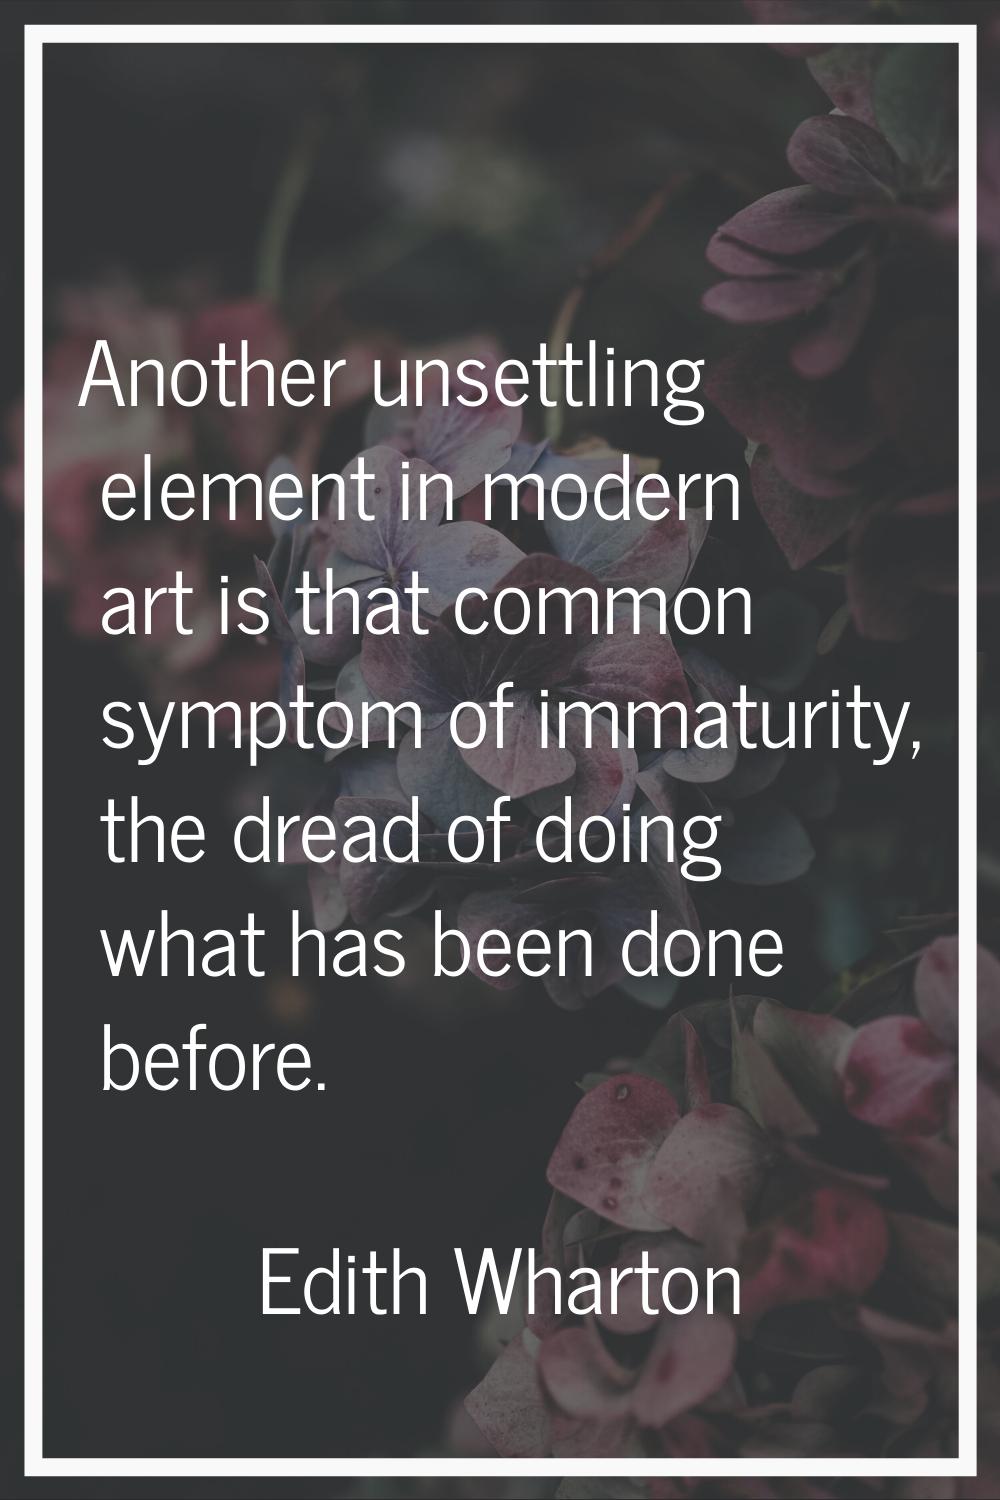 Another unsettling element in modern art is that common symptom of immaturity, the dread of doing w